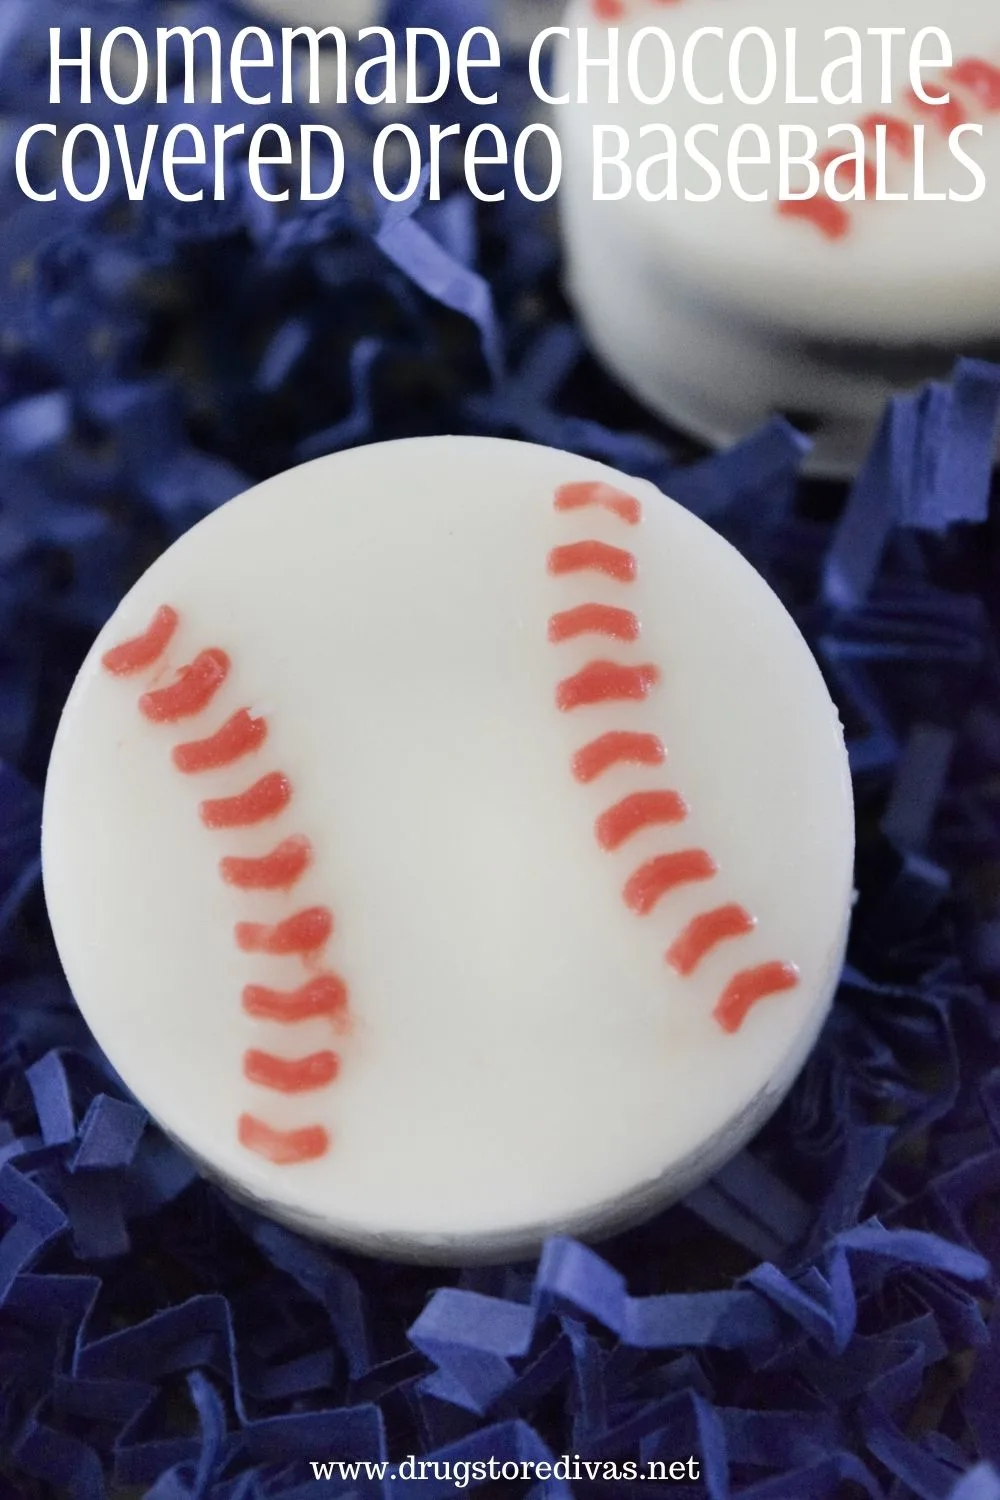 A baseball shaped cookie with the words "Homemade Chocolate Covered Oreo Baseballs" digitally written on top.